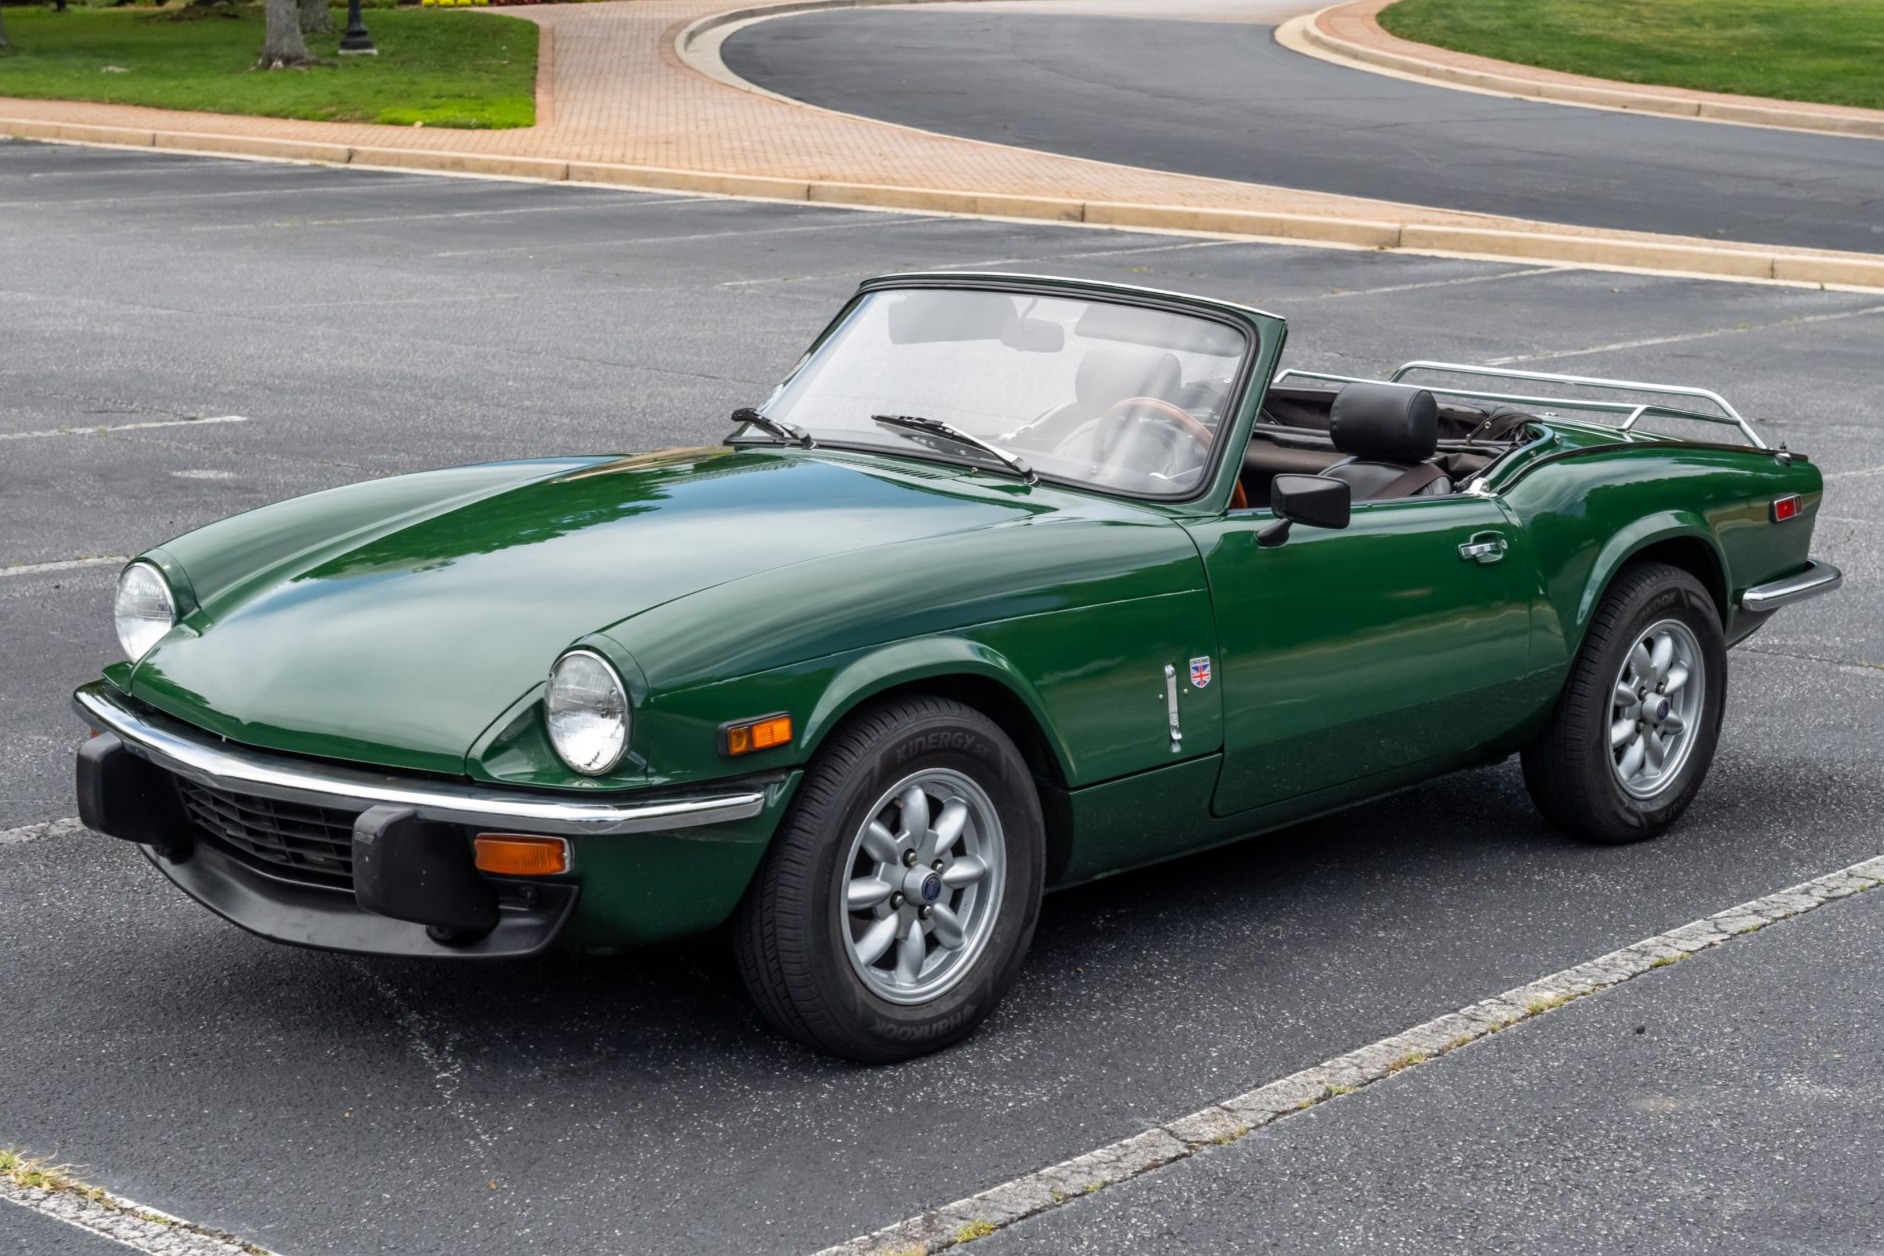 Used 1977 Triumph Spitfire 1500 Review